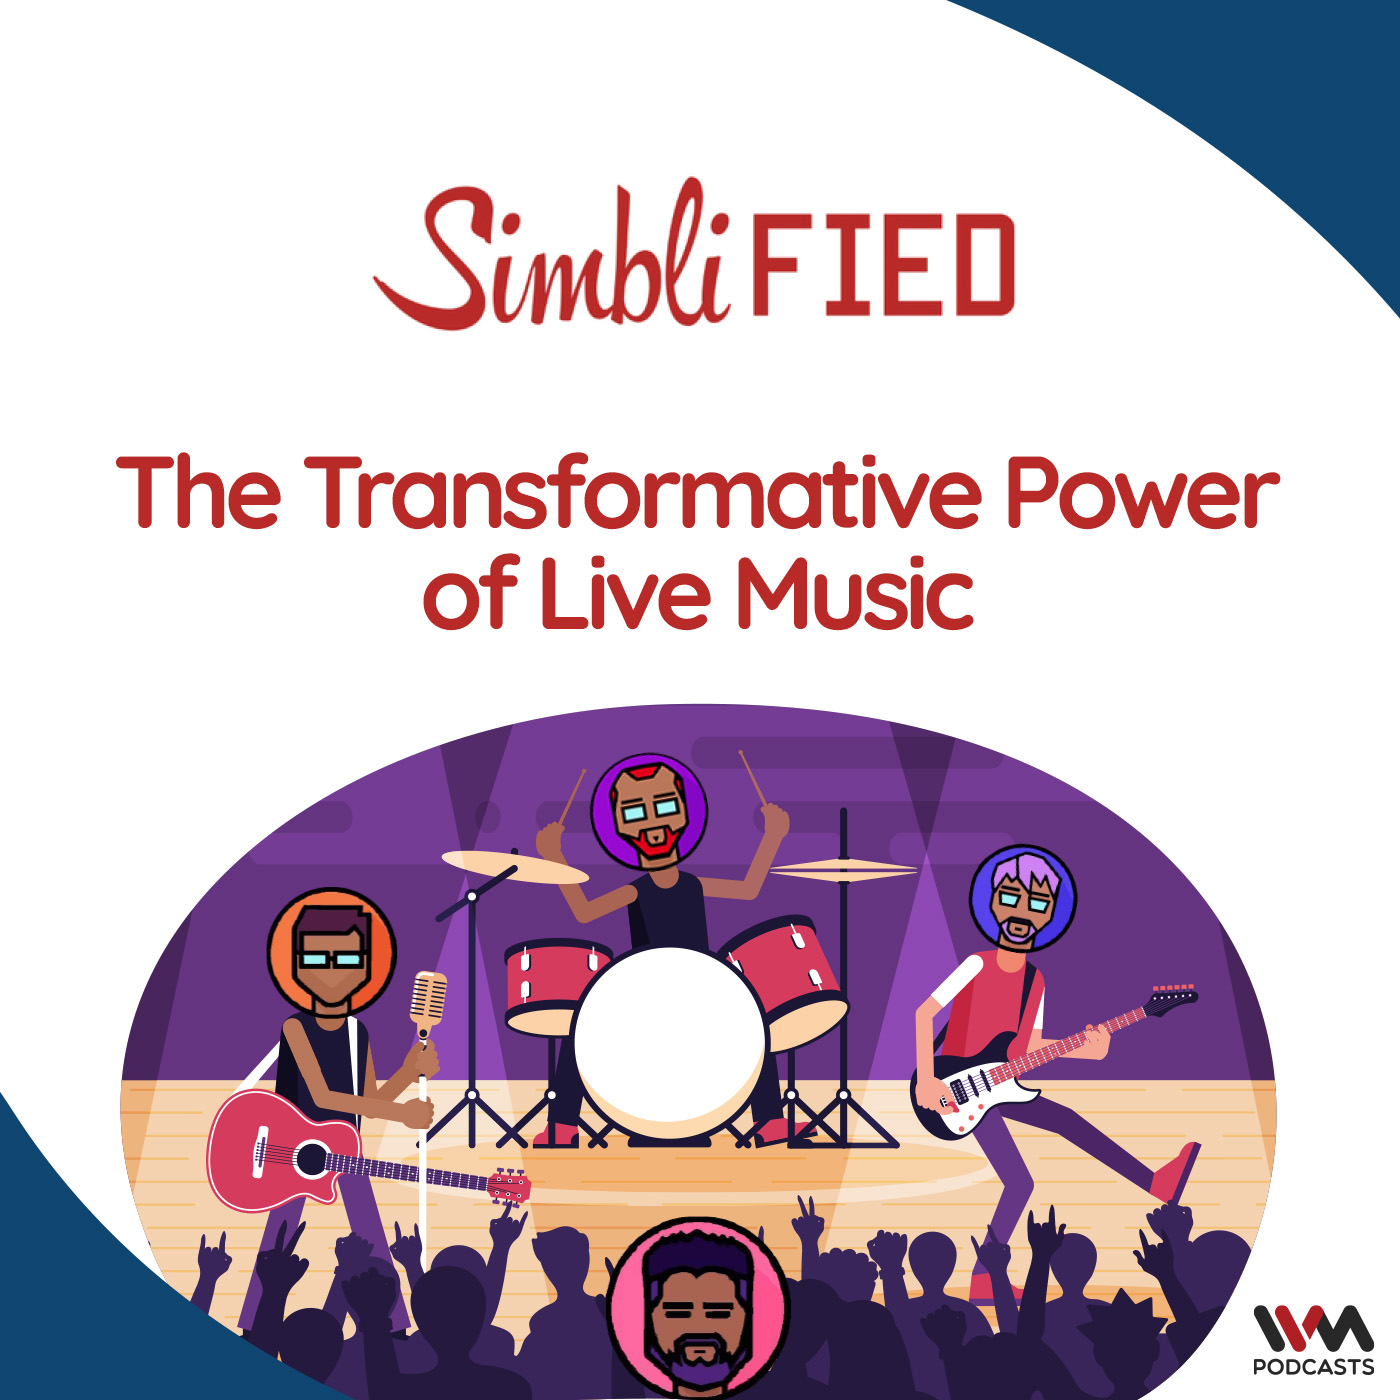 The transformative power of live music